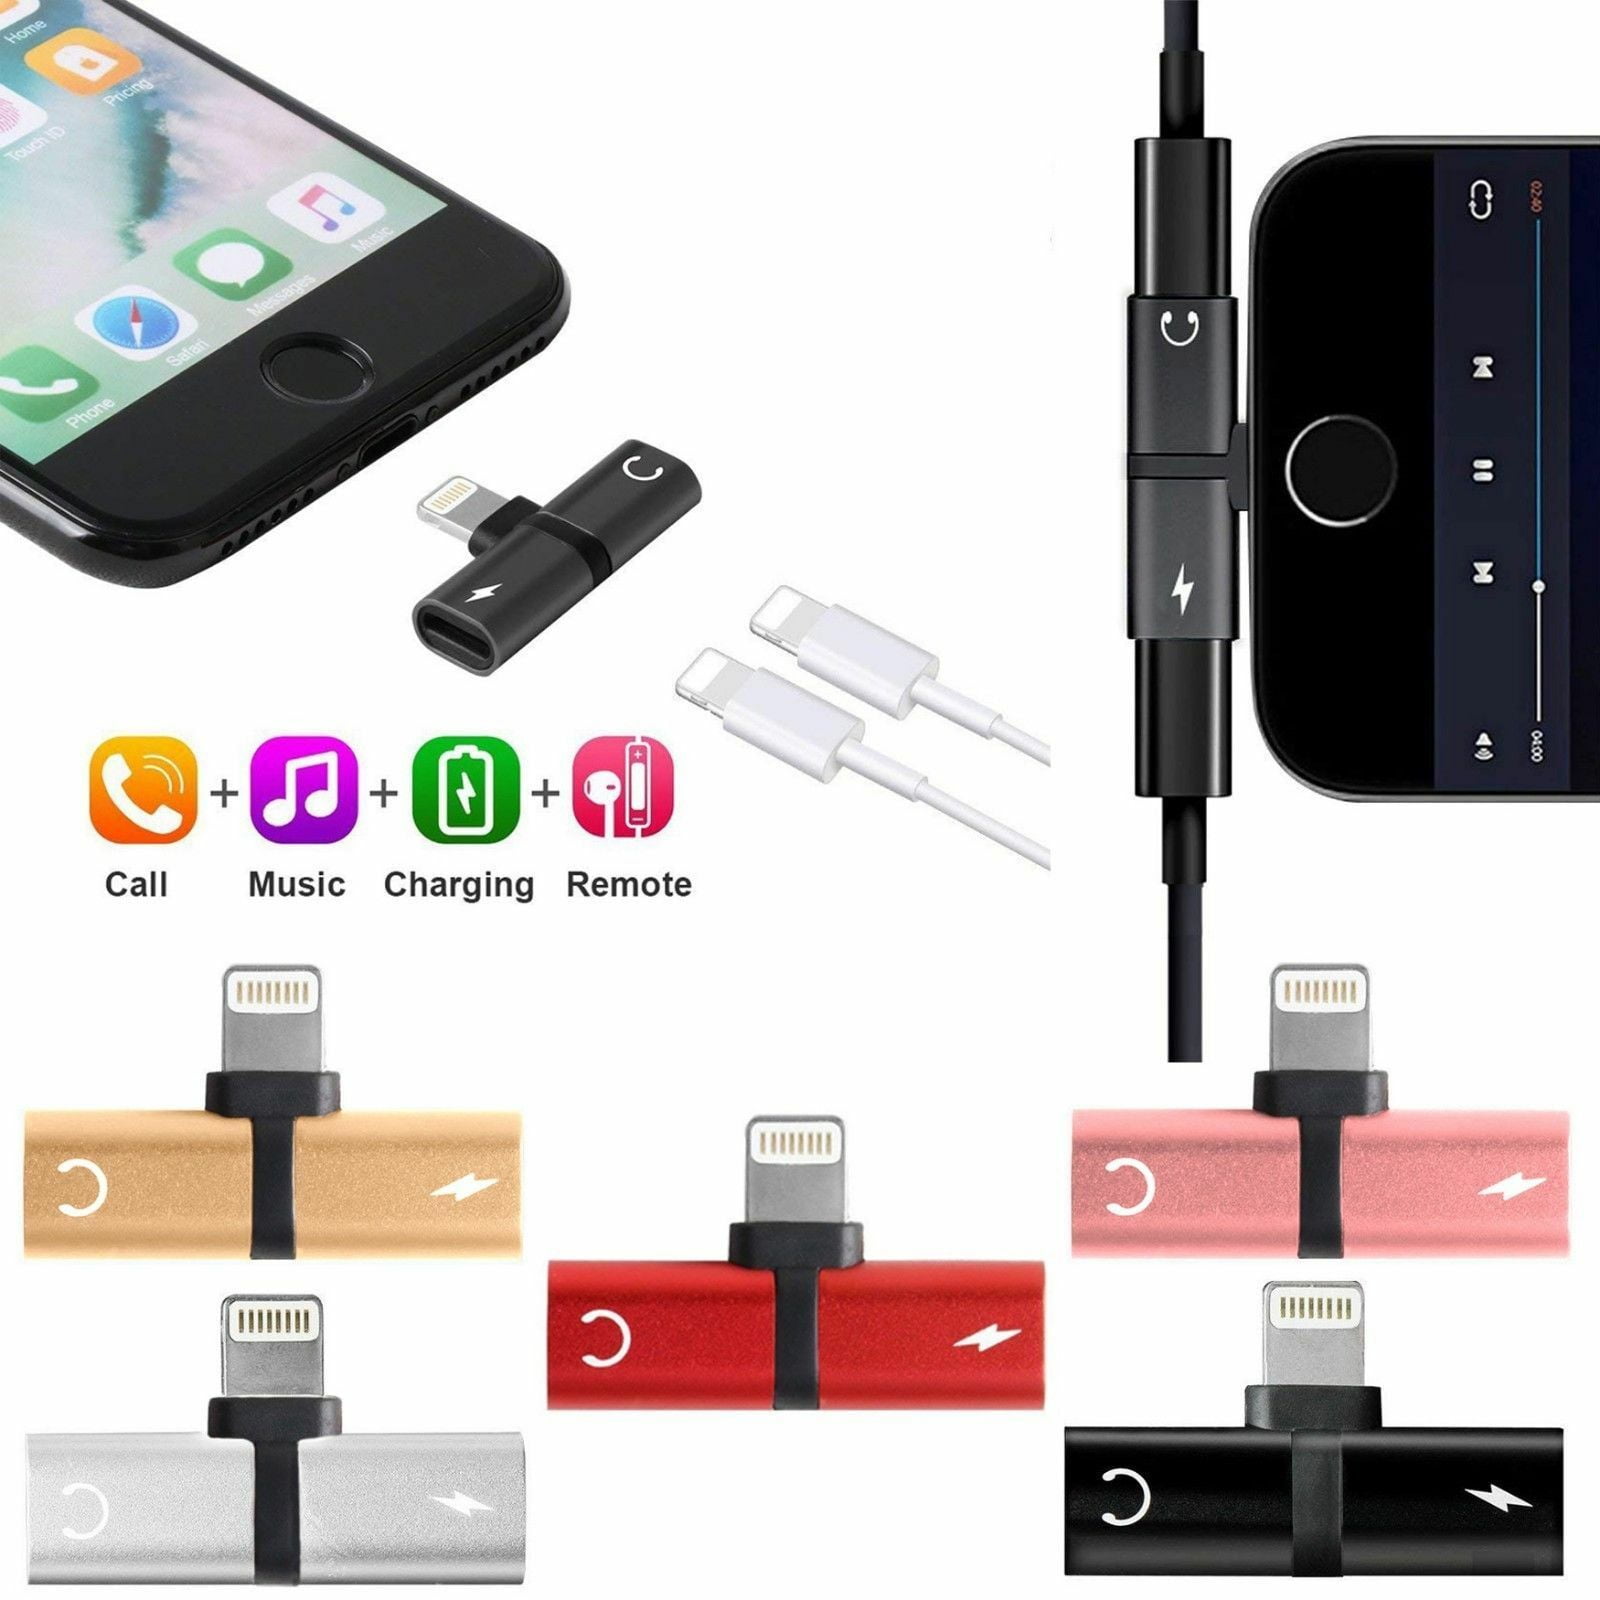 Headphone Adapter for iPhone X Splitter AUX Audio Jack Charge Car Charger Dual Earphone Cable Converter Compatible for iPhone X/XS/8/8Plus/7/7Plus Support All iOS Audio+Charge+Call+Volume Control 